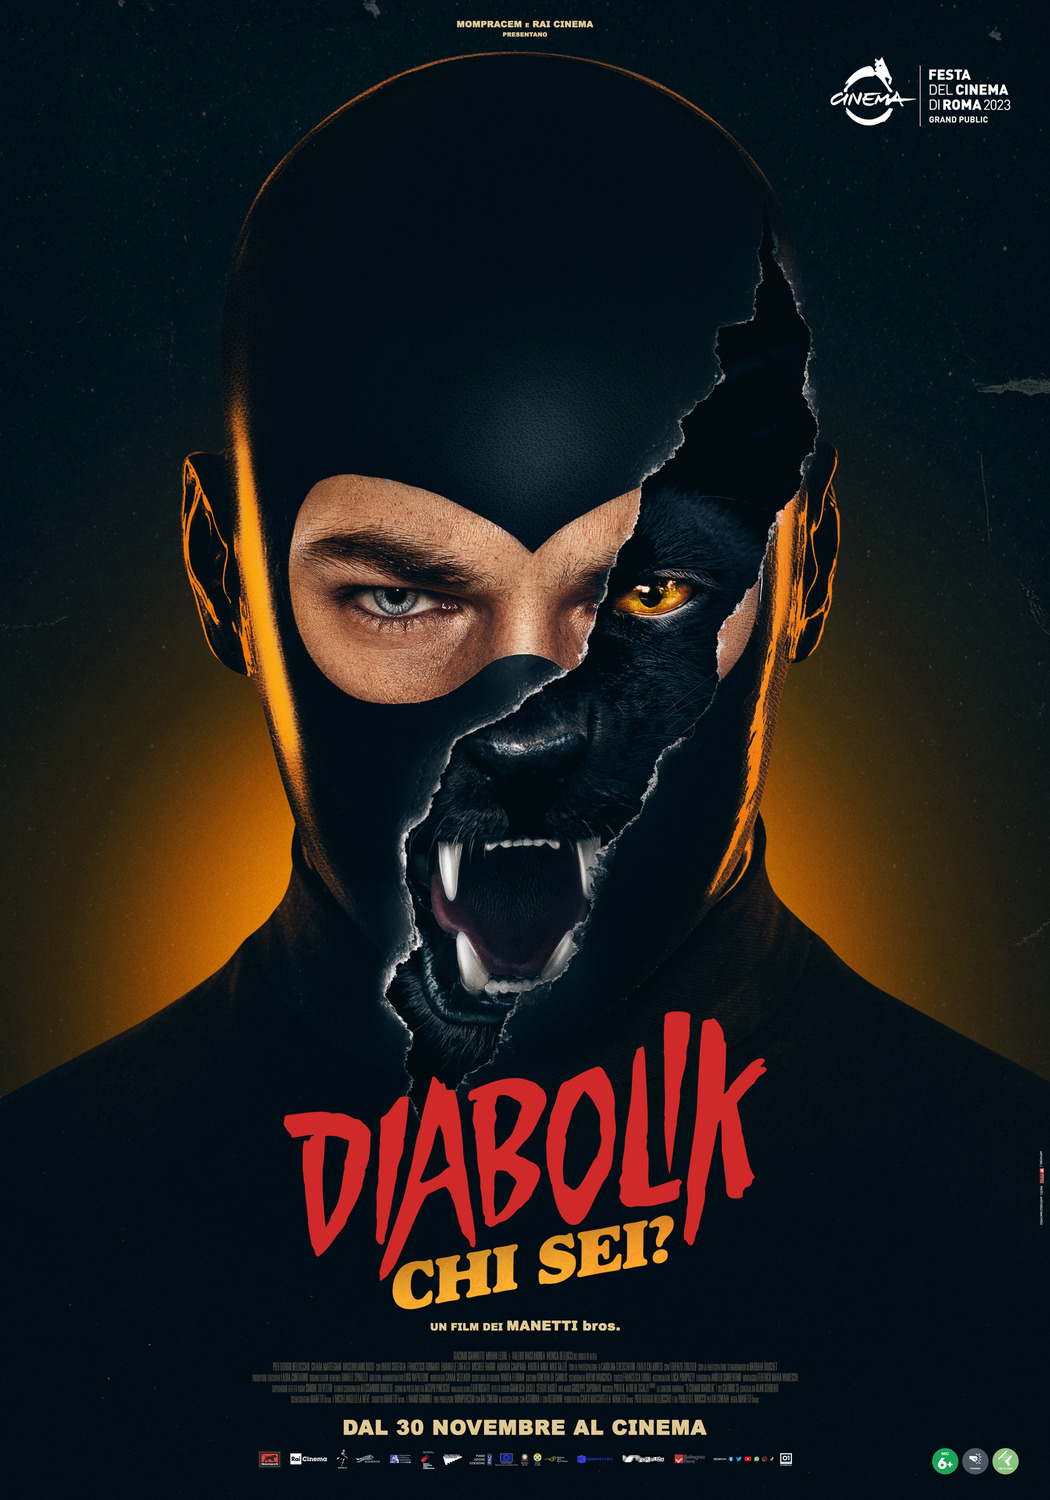 Extra Large Movie Poster Image for Diabolik chi sei? (#3 of 6)